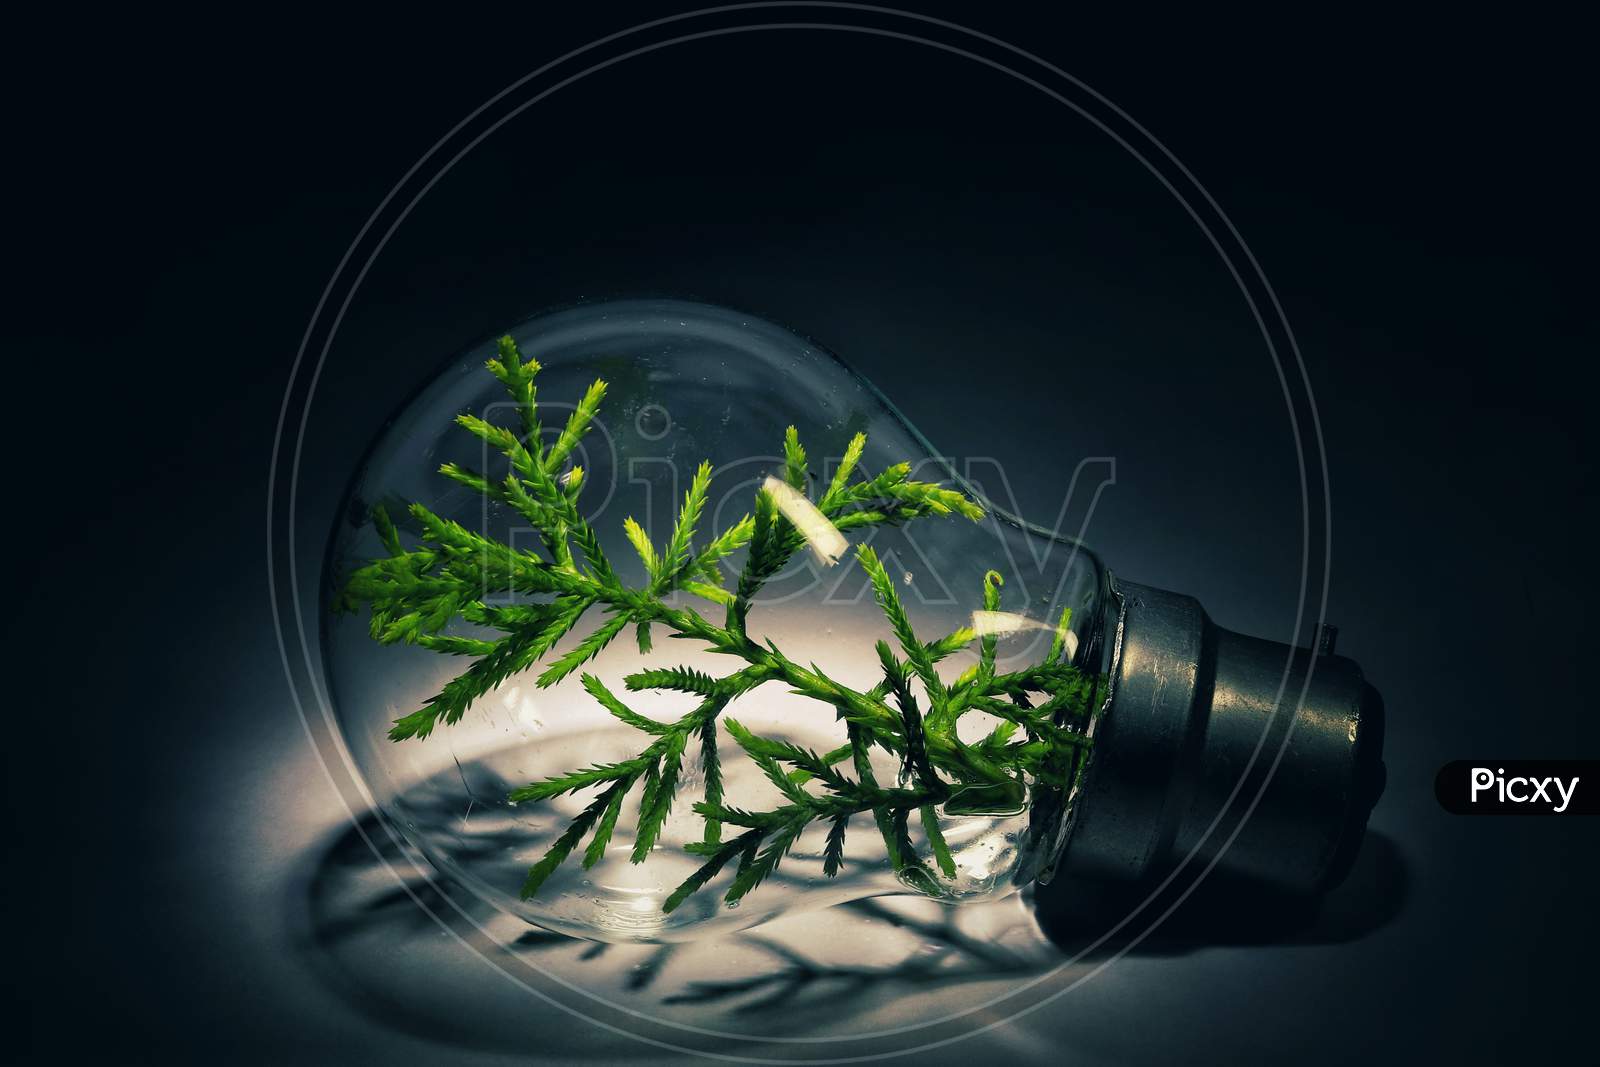 A small plant inside the glass bulb isolated with black background